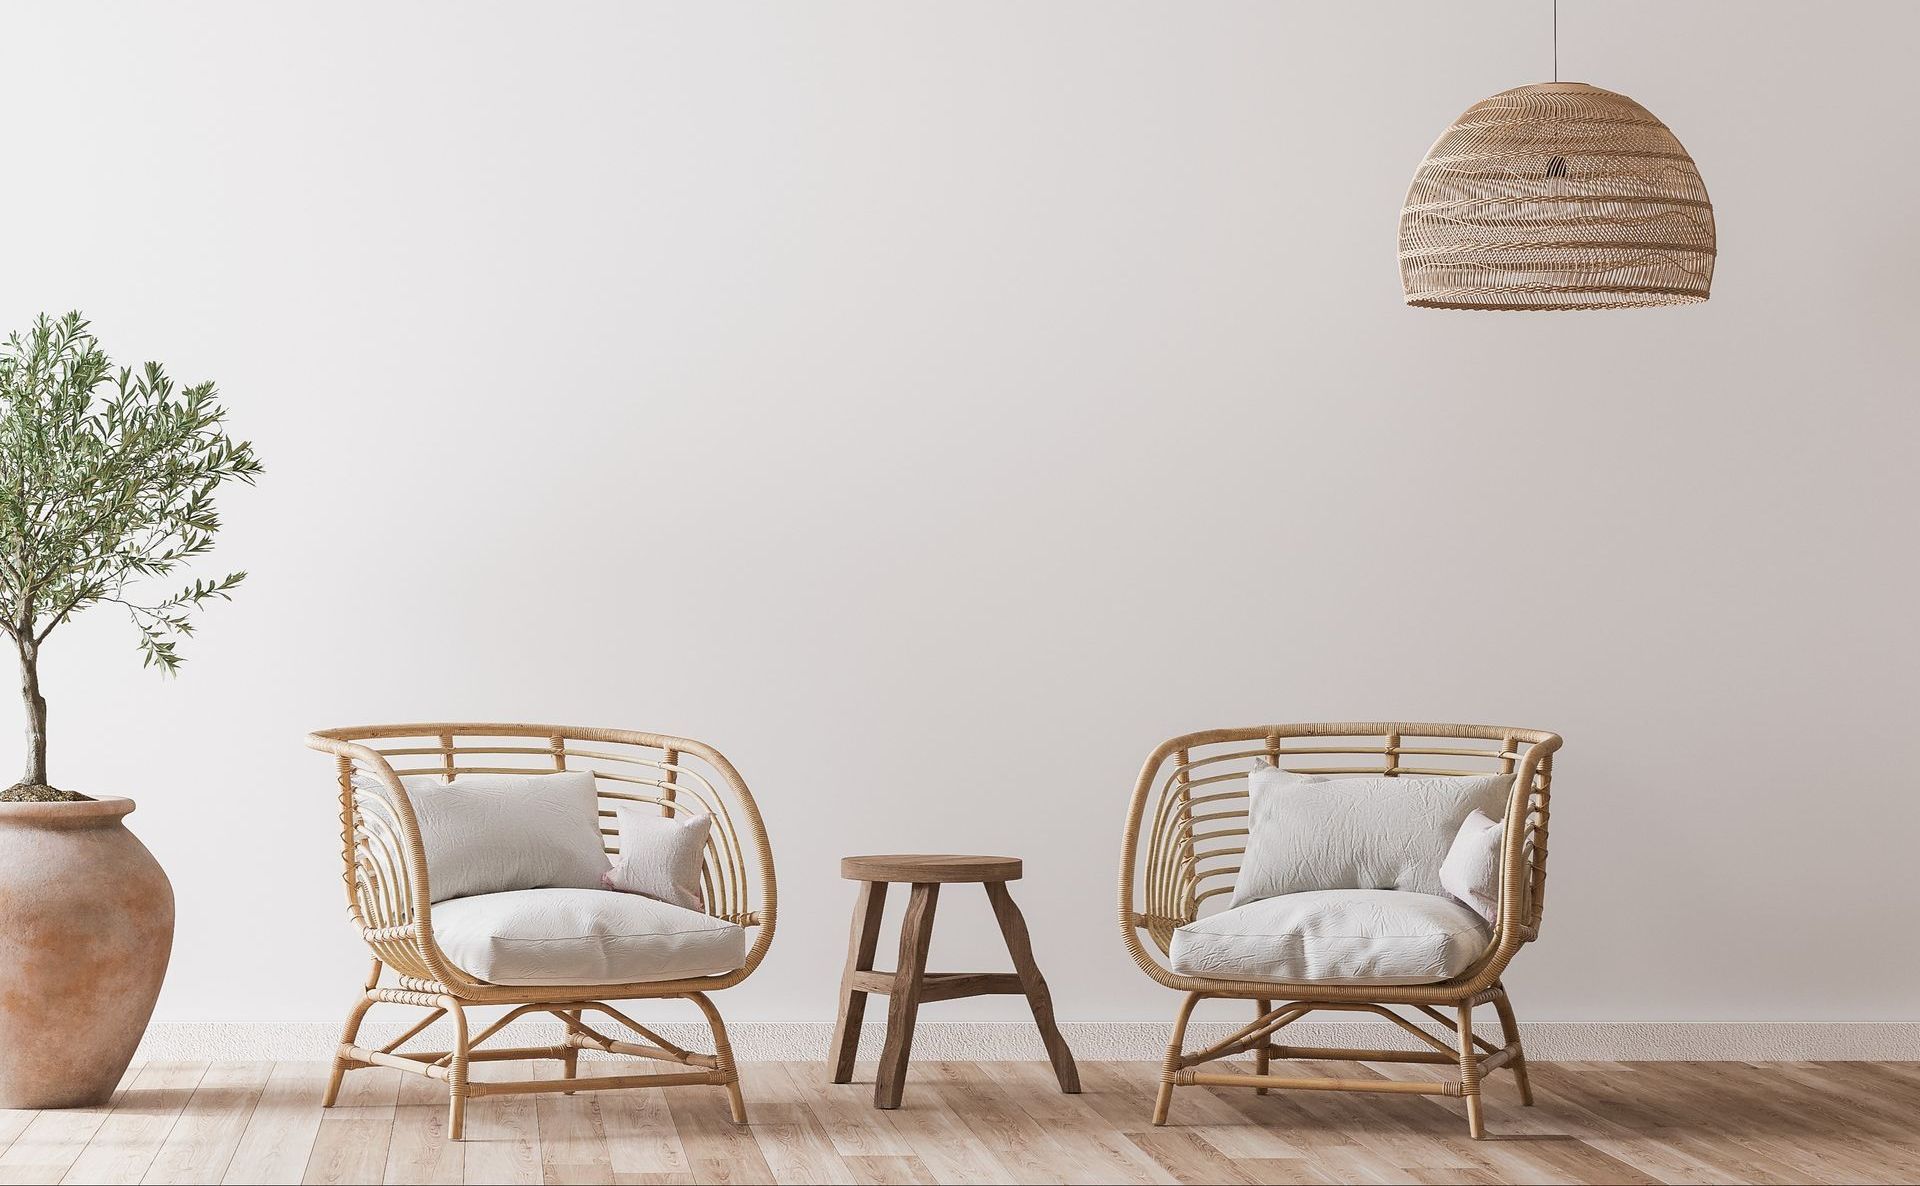 two Scandinavian style wicker chairs and a stool in front of a white wall